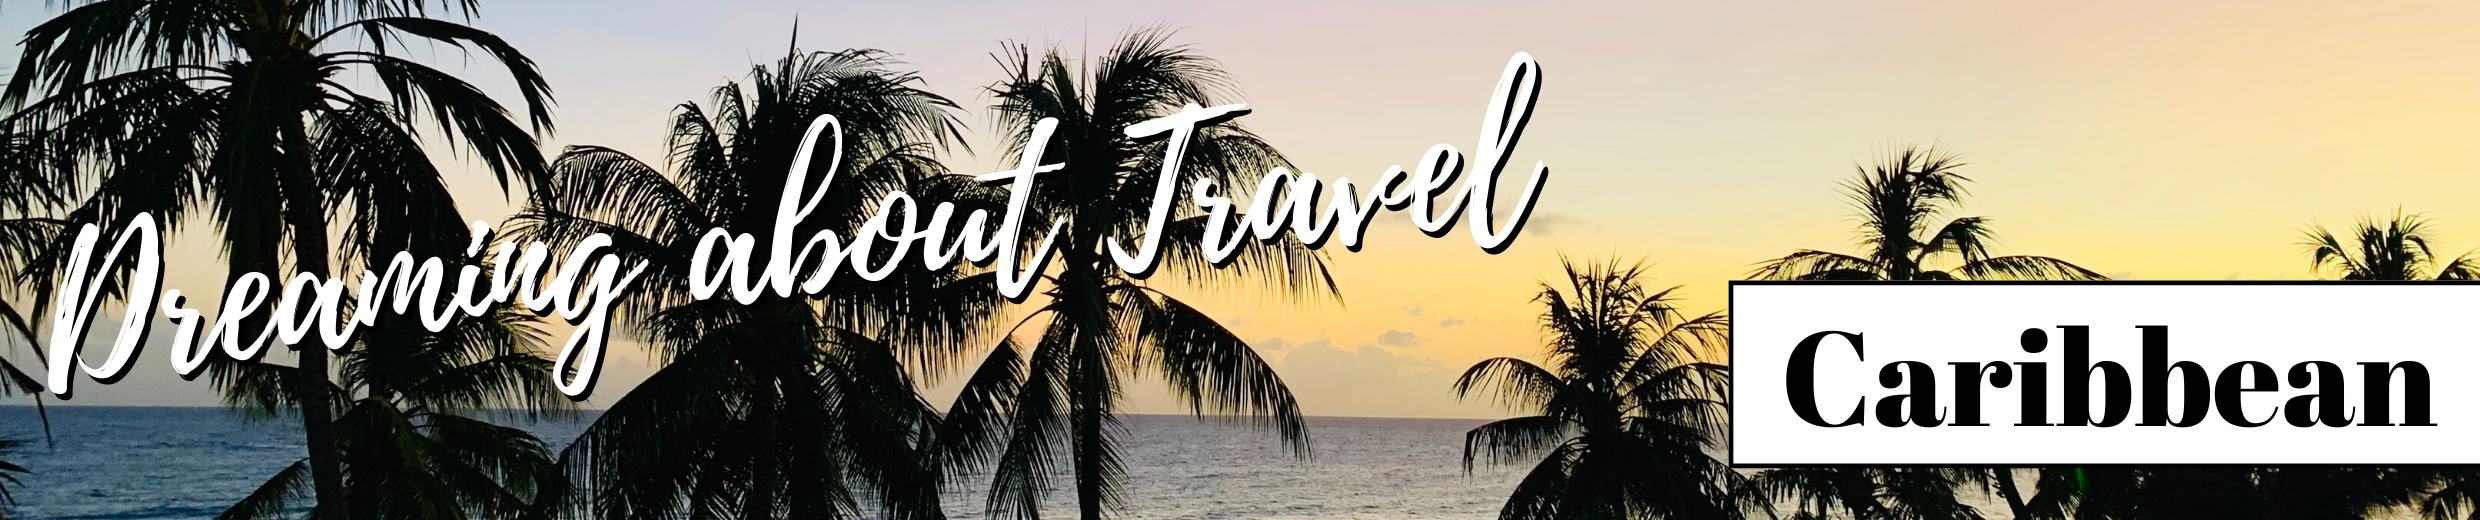 Dreaming about Travel in the Caribbean